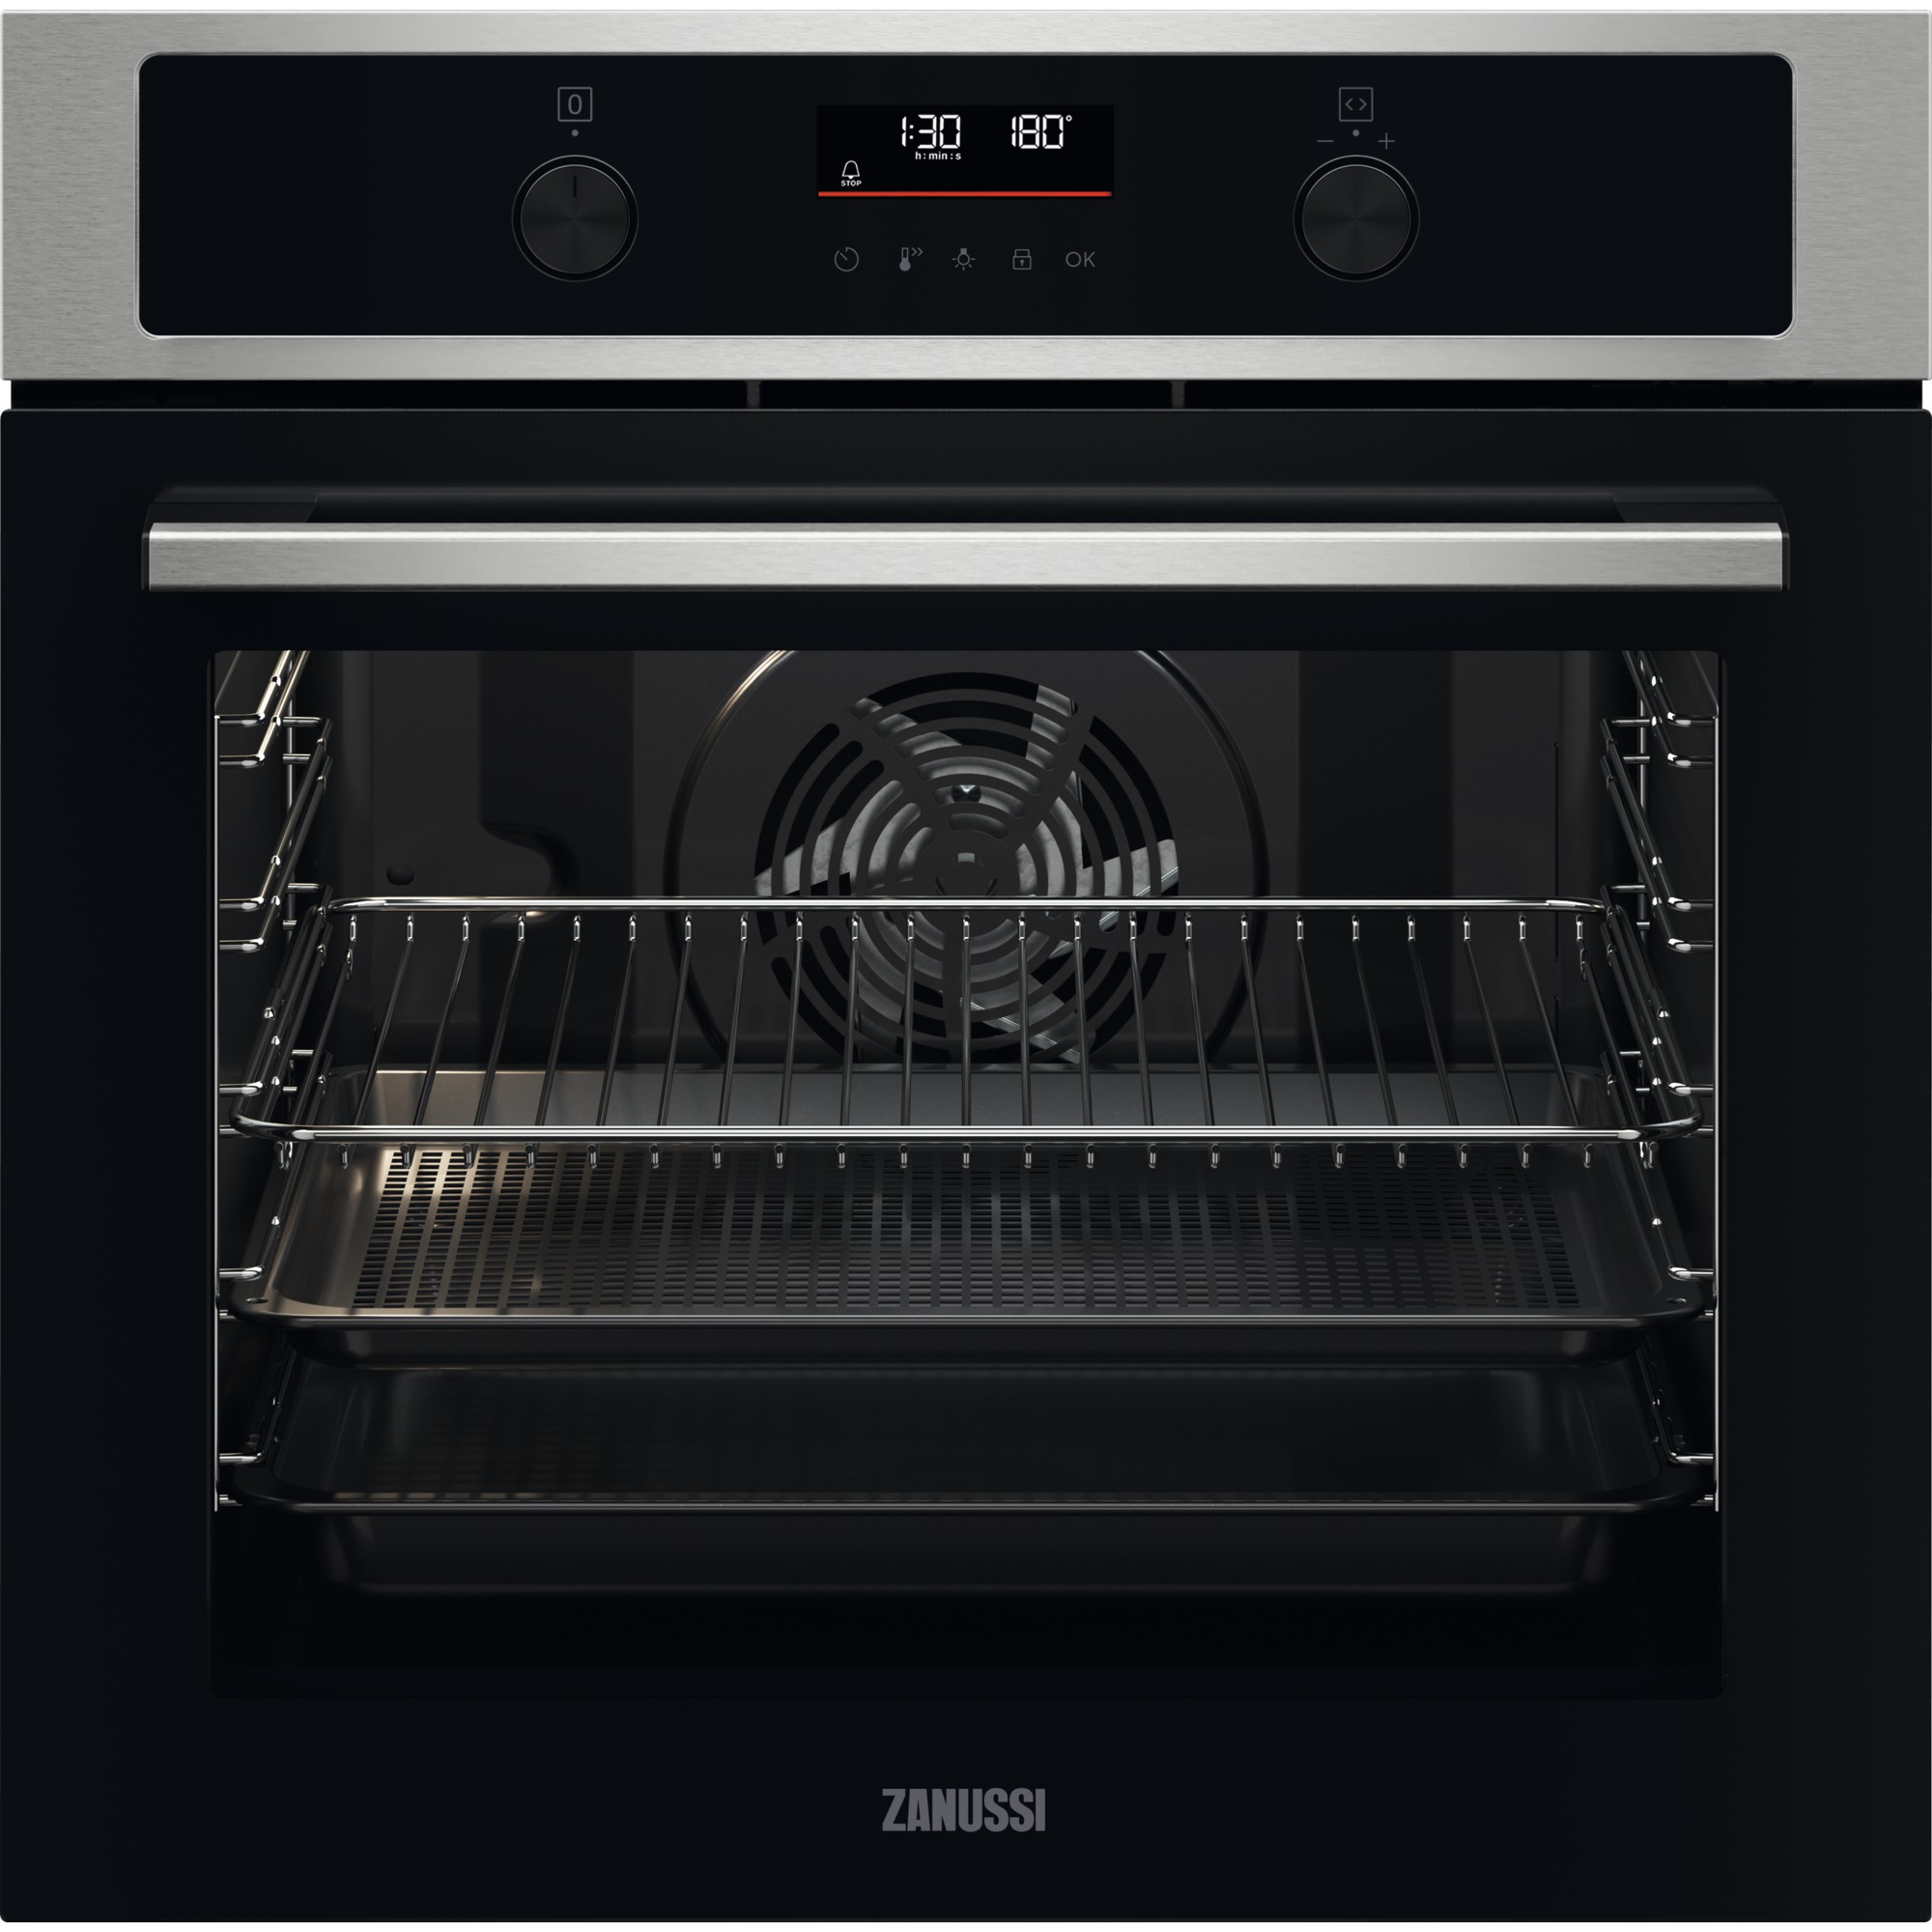 Zanussi Built-in Single Electric Oven AirFry Stainless Steel